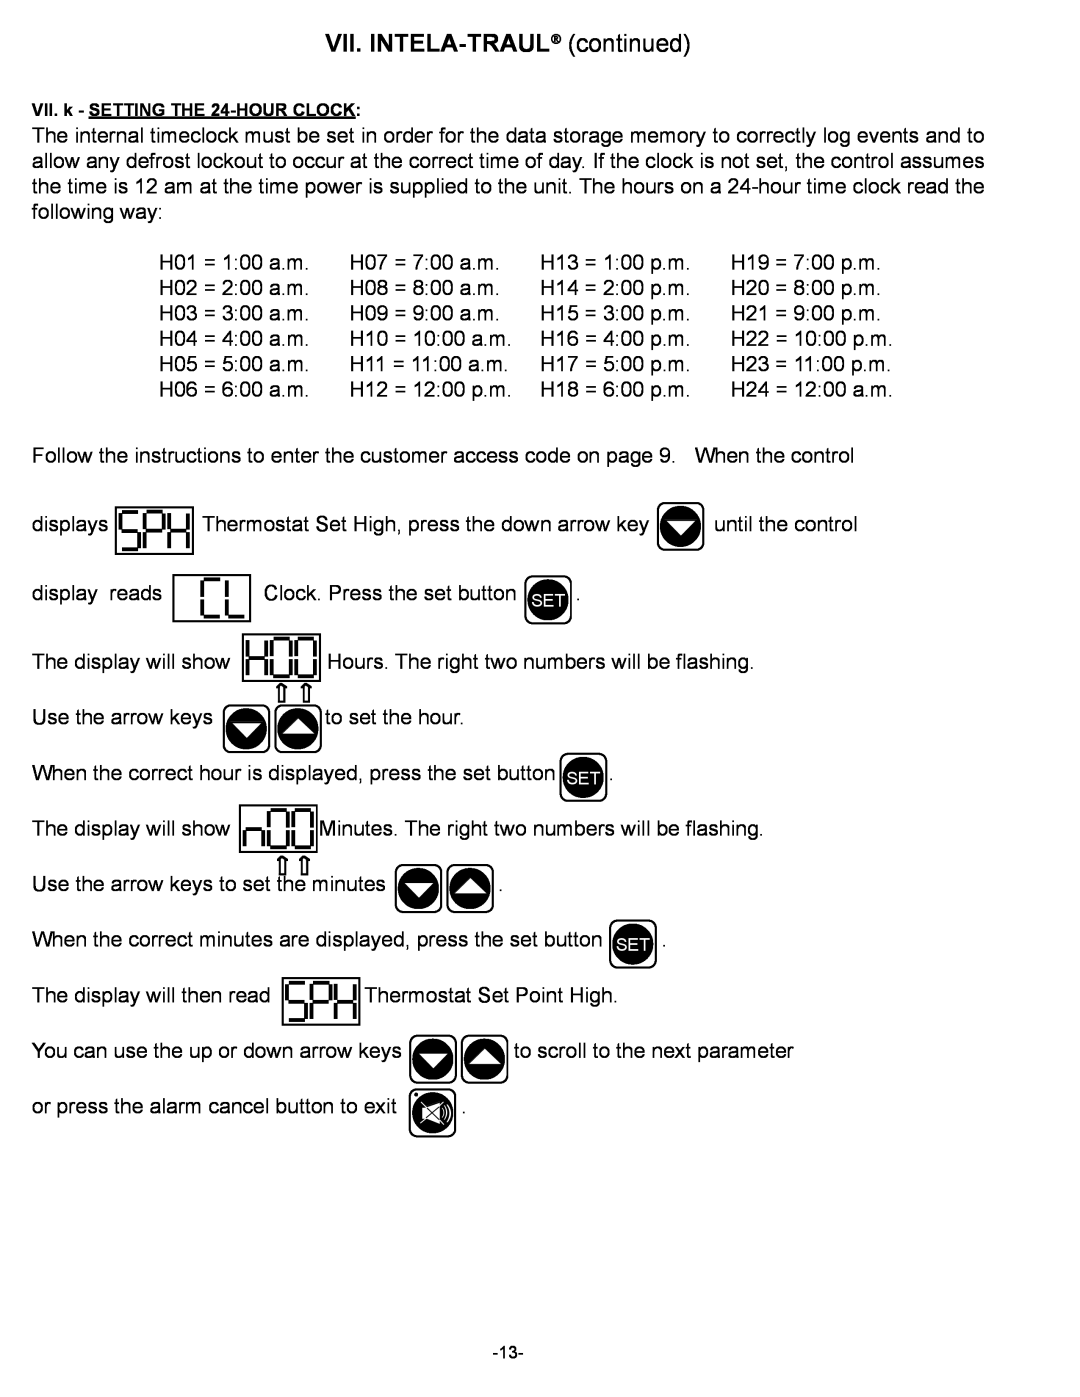 Traulsen UC Series, UL Series owner manual VII. INTELA-TRAUL continued, VII. k - SETTING THE 24-HOUR CLOCK 